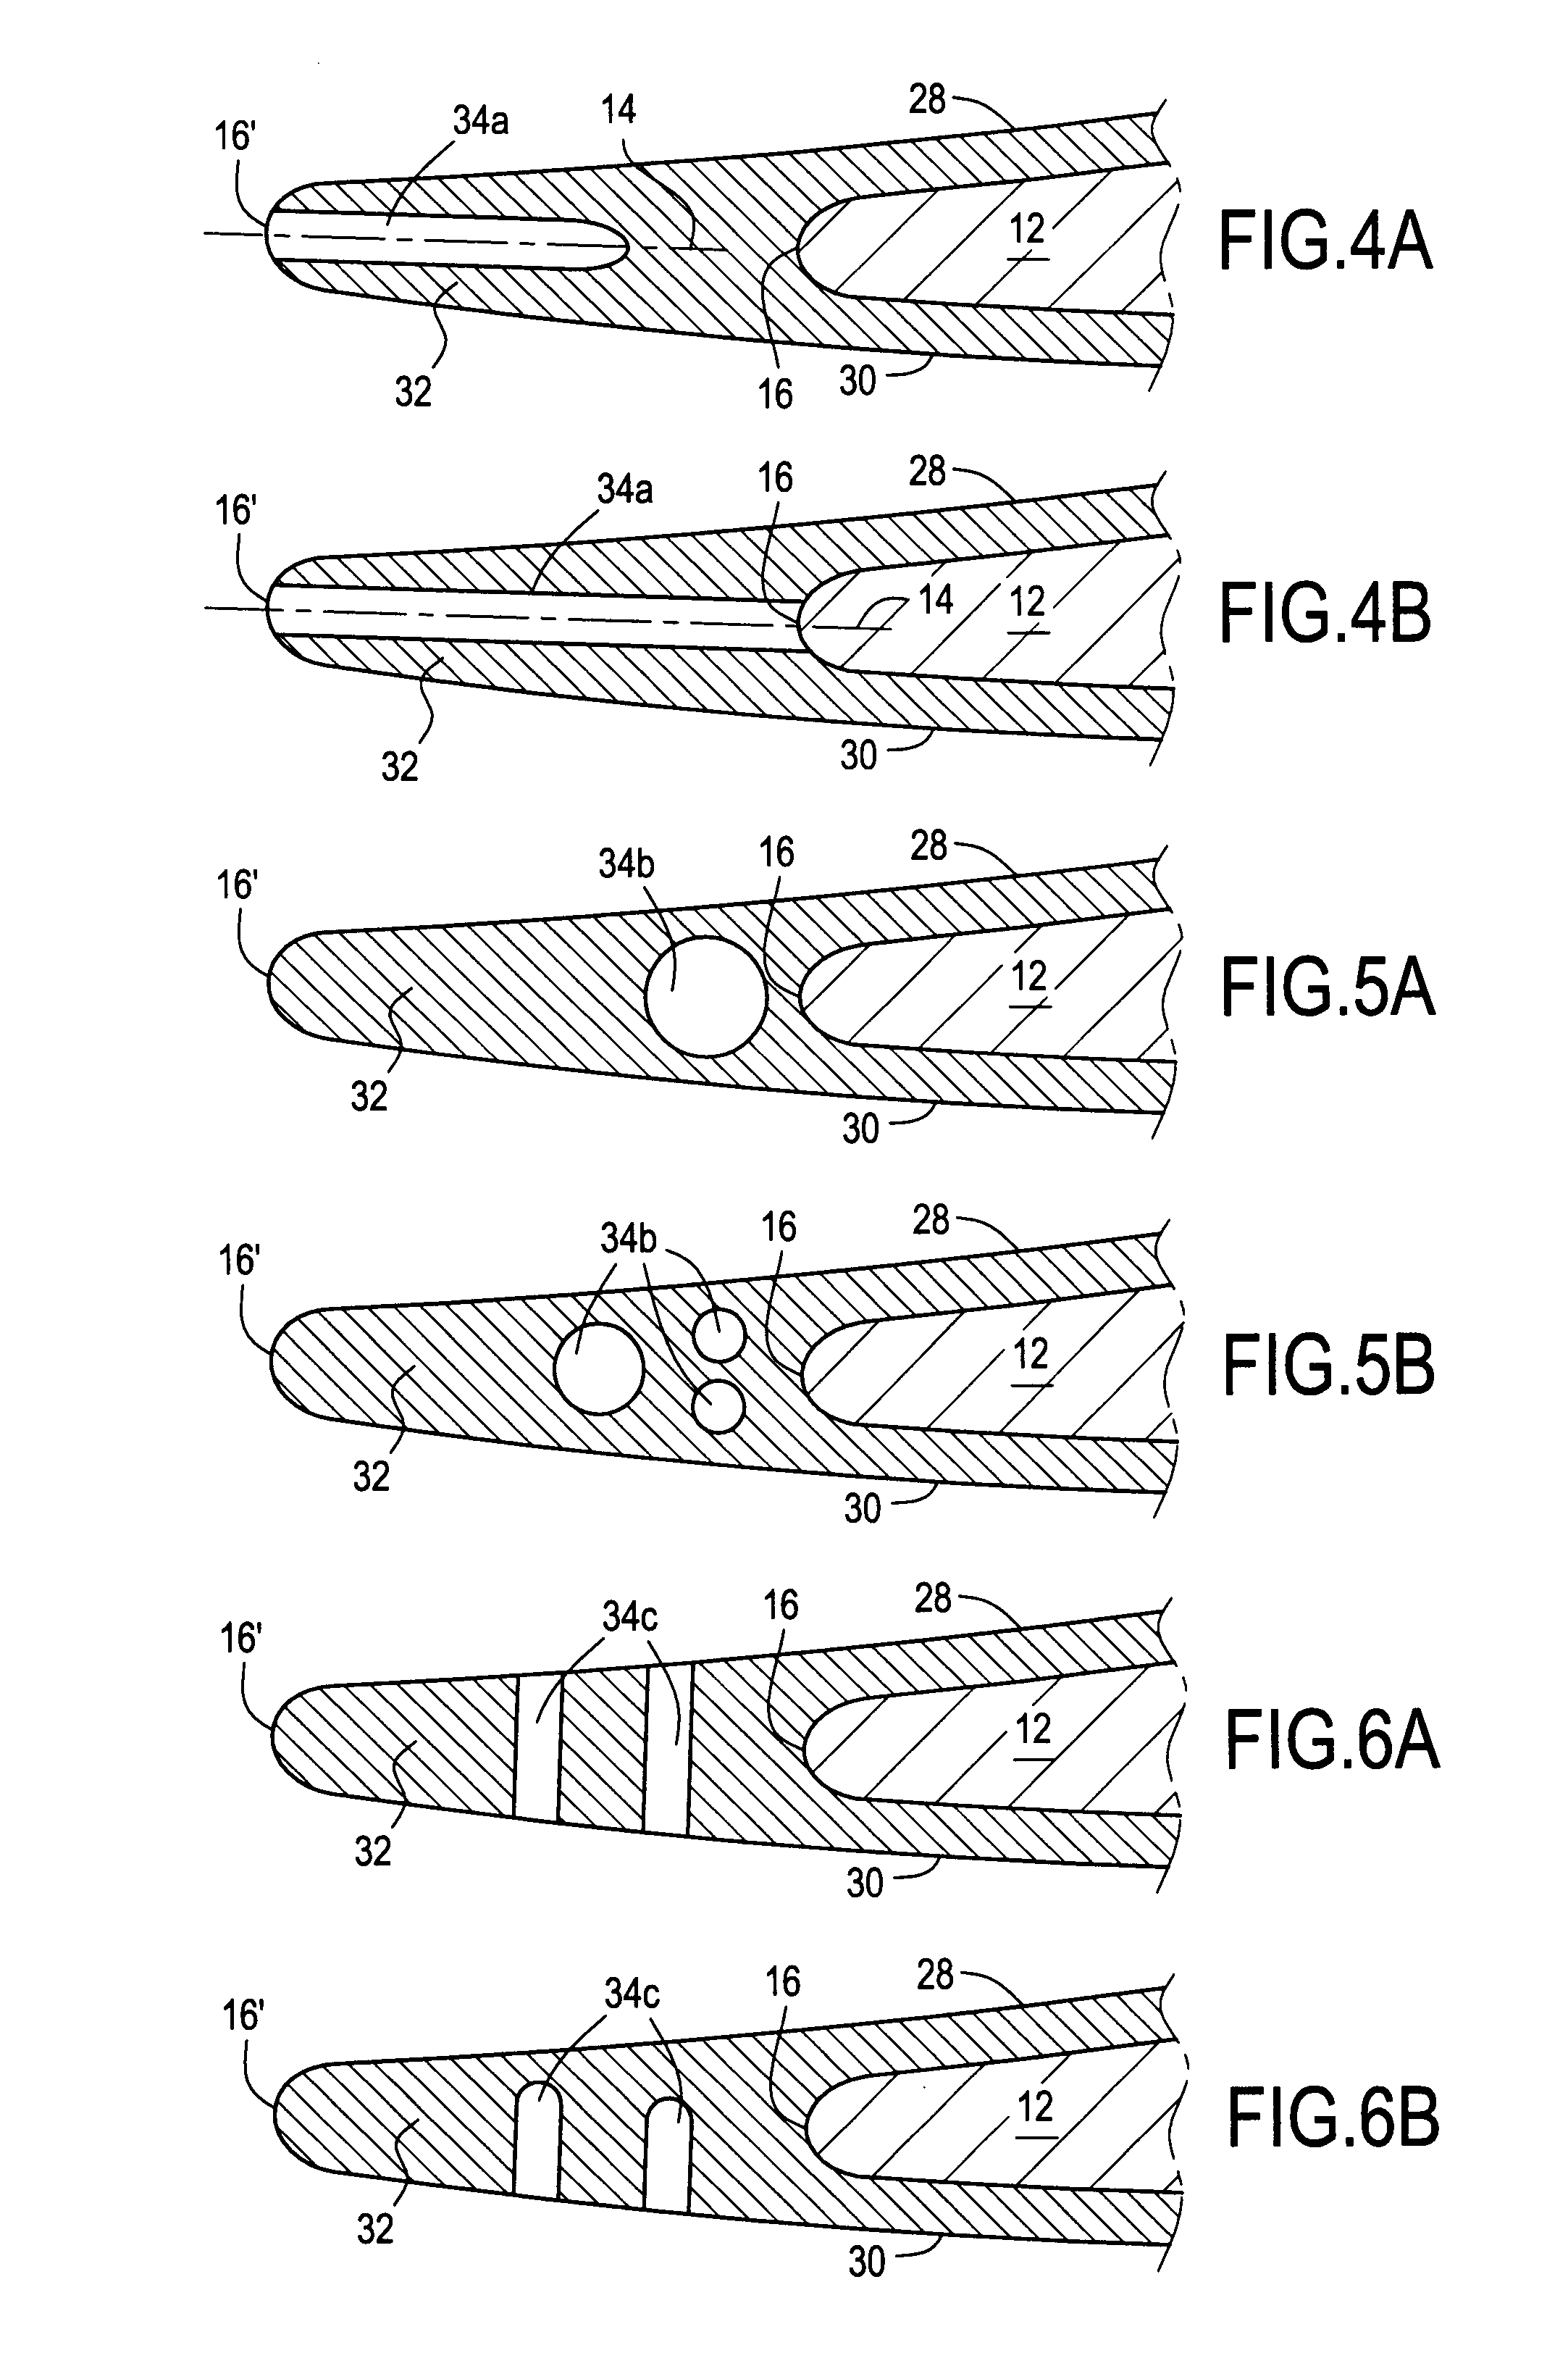 Composite turbomachine blade with metal reinforcement